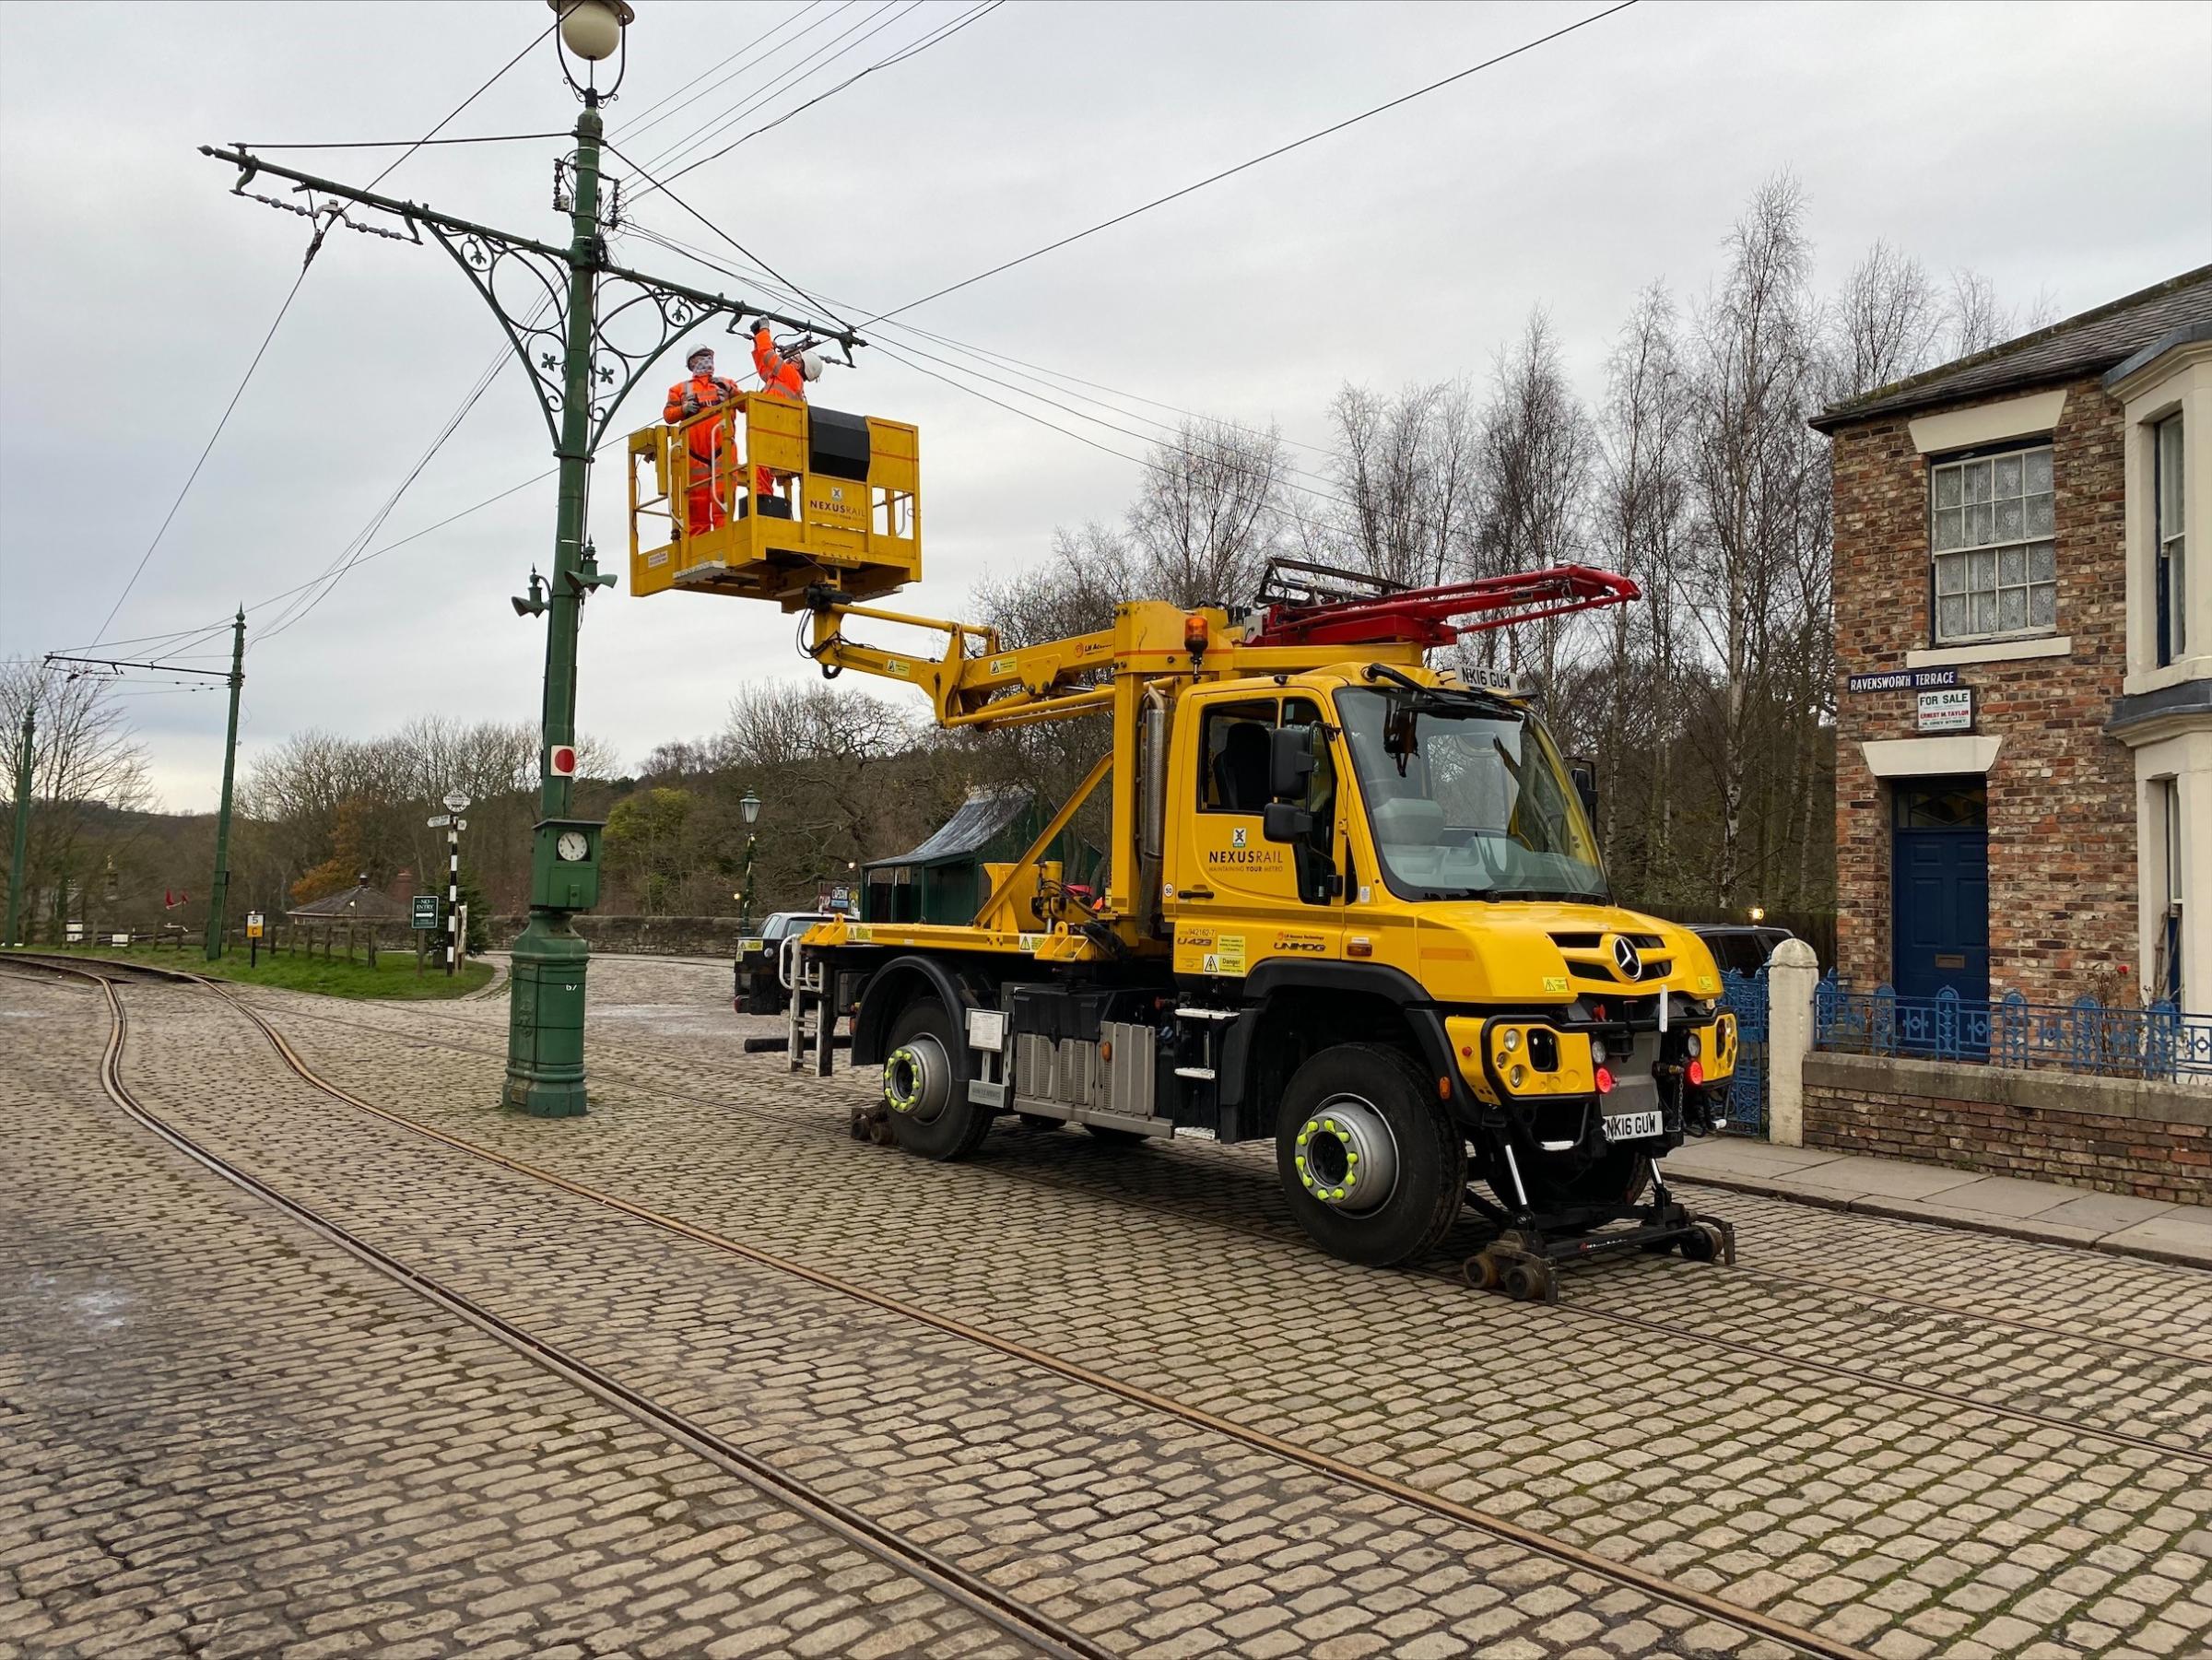 Railway engineers from the Tyne and Wear Metro have stepped back in time at Beamish Museum to help ensure its iconic Tramway is in tip top condition